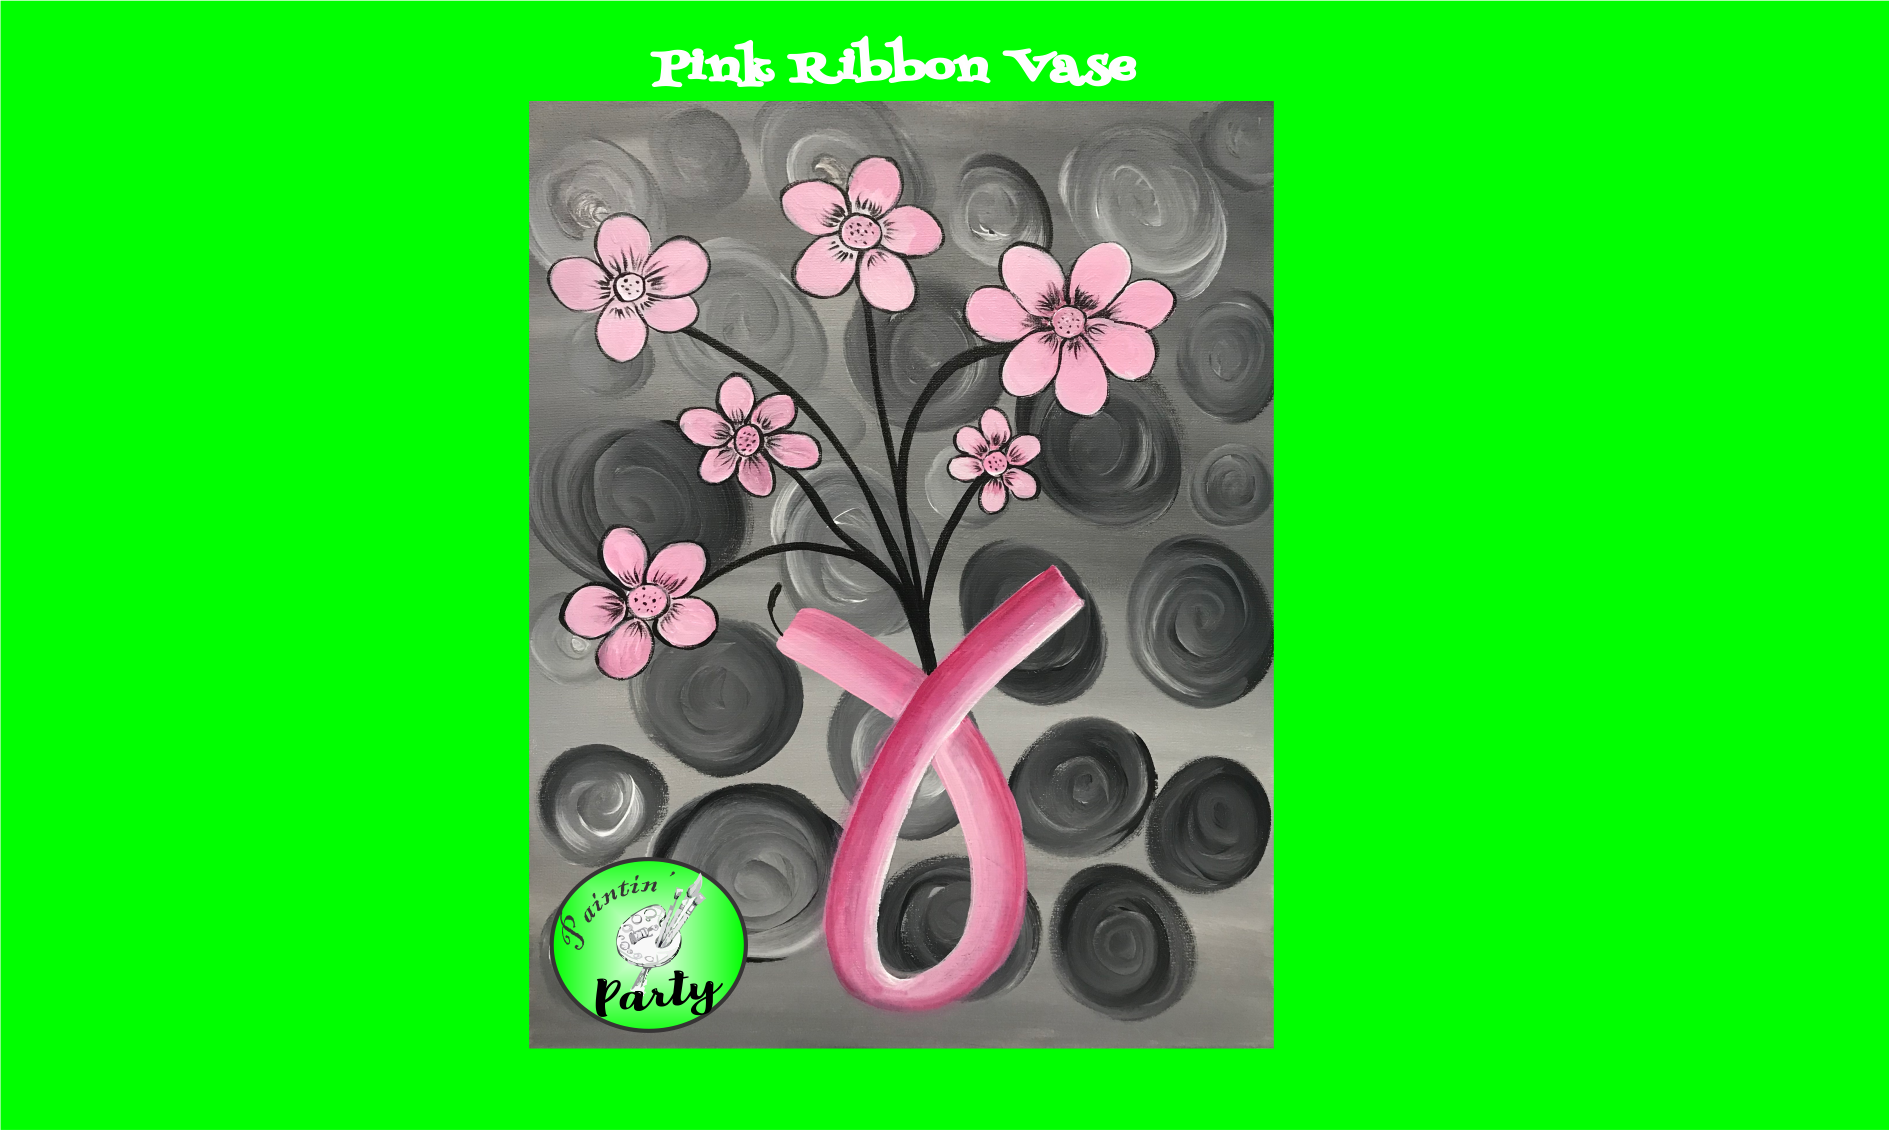 PAINTIN' PARTY with KAT: Pink Ribbon Vase (ACRYLIC PAINTING on CANVAS)